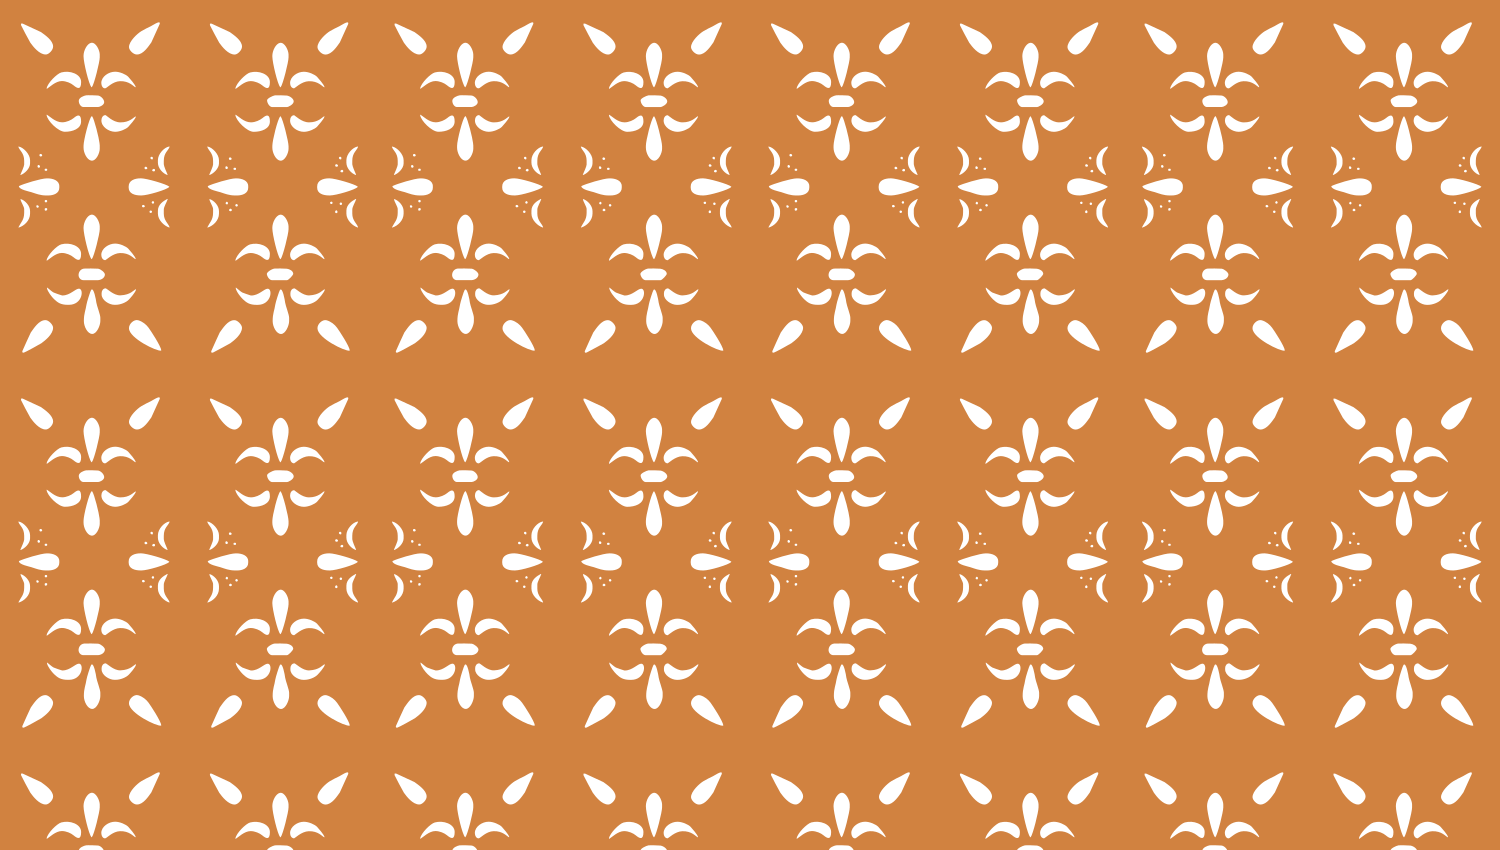 Parasoleil™ Grand Fleur© pattern displayed with a ochre color overlay